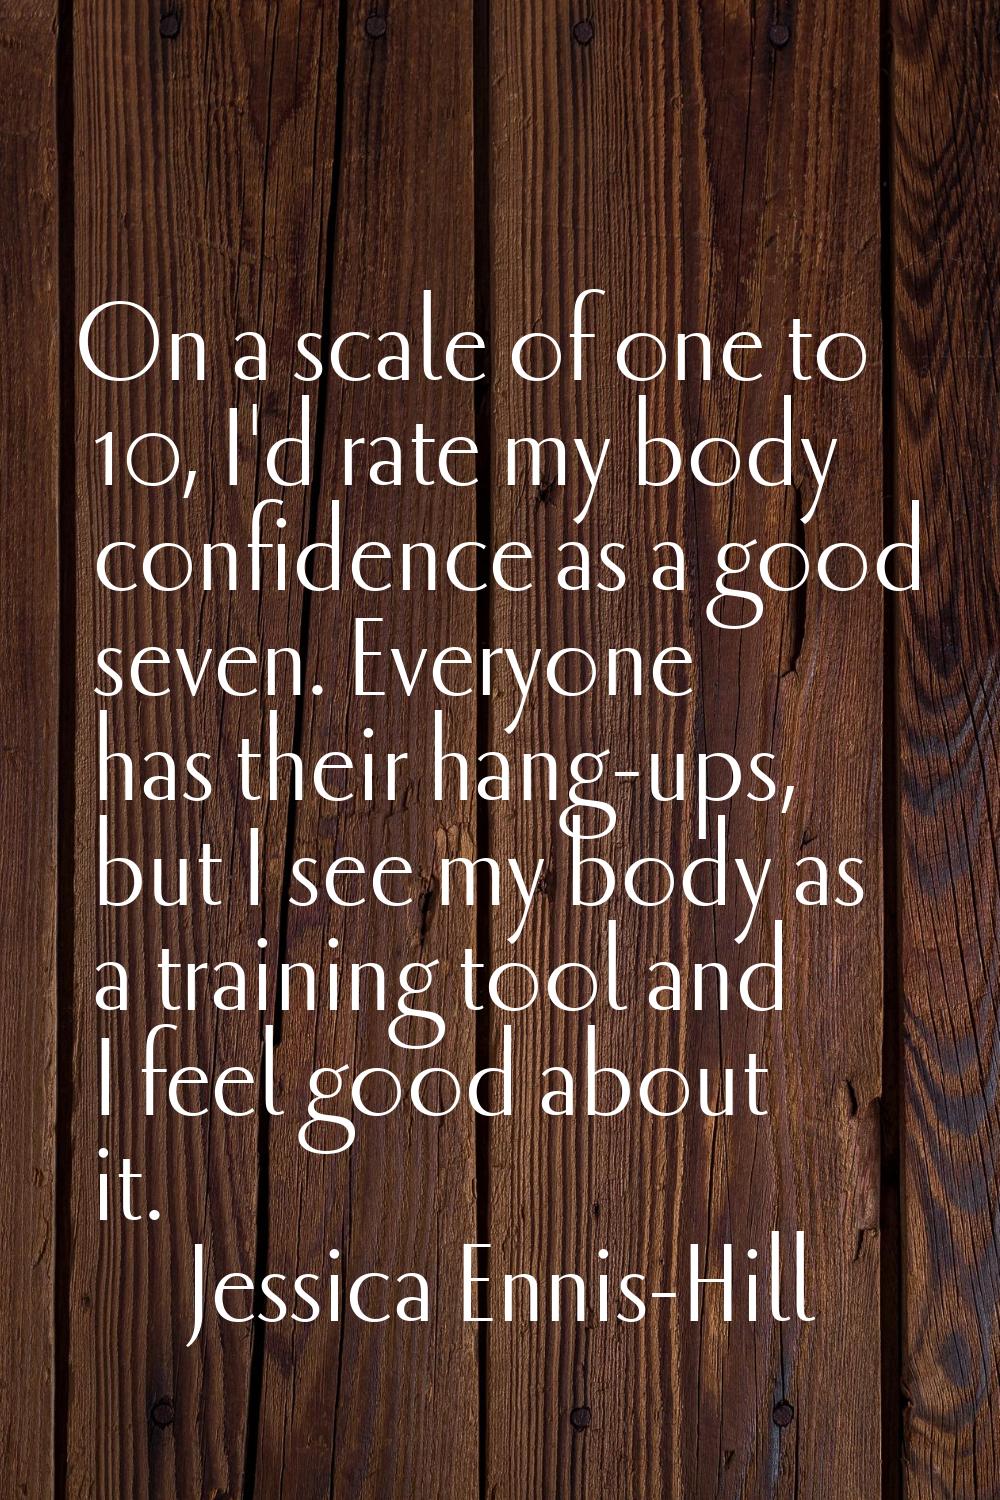 On a scale of one to 10, I'd rate my body confidence as a good seven. Everyone has their hang-ups, 